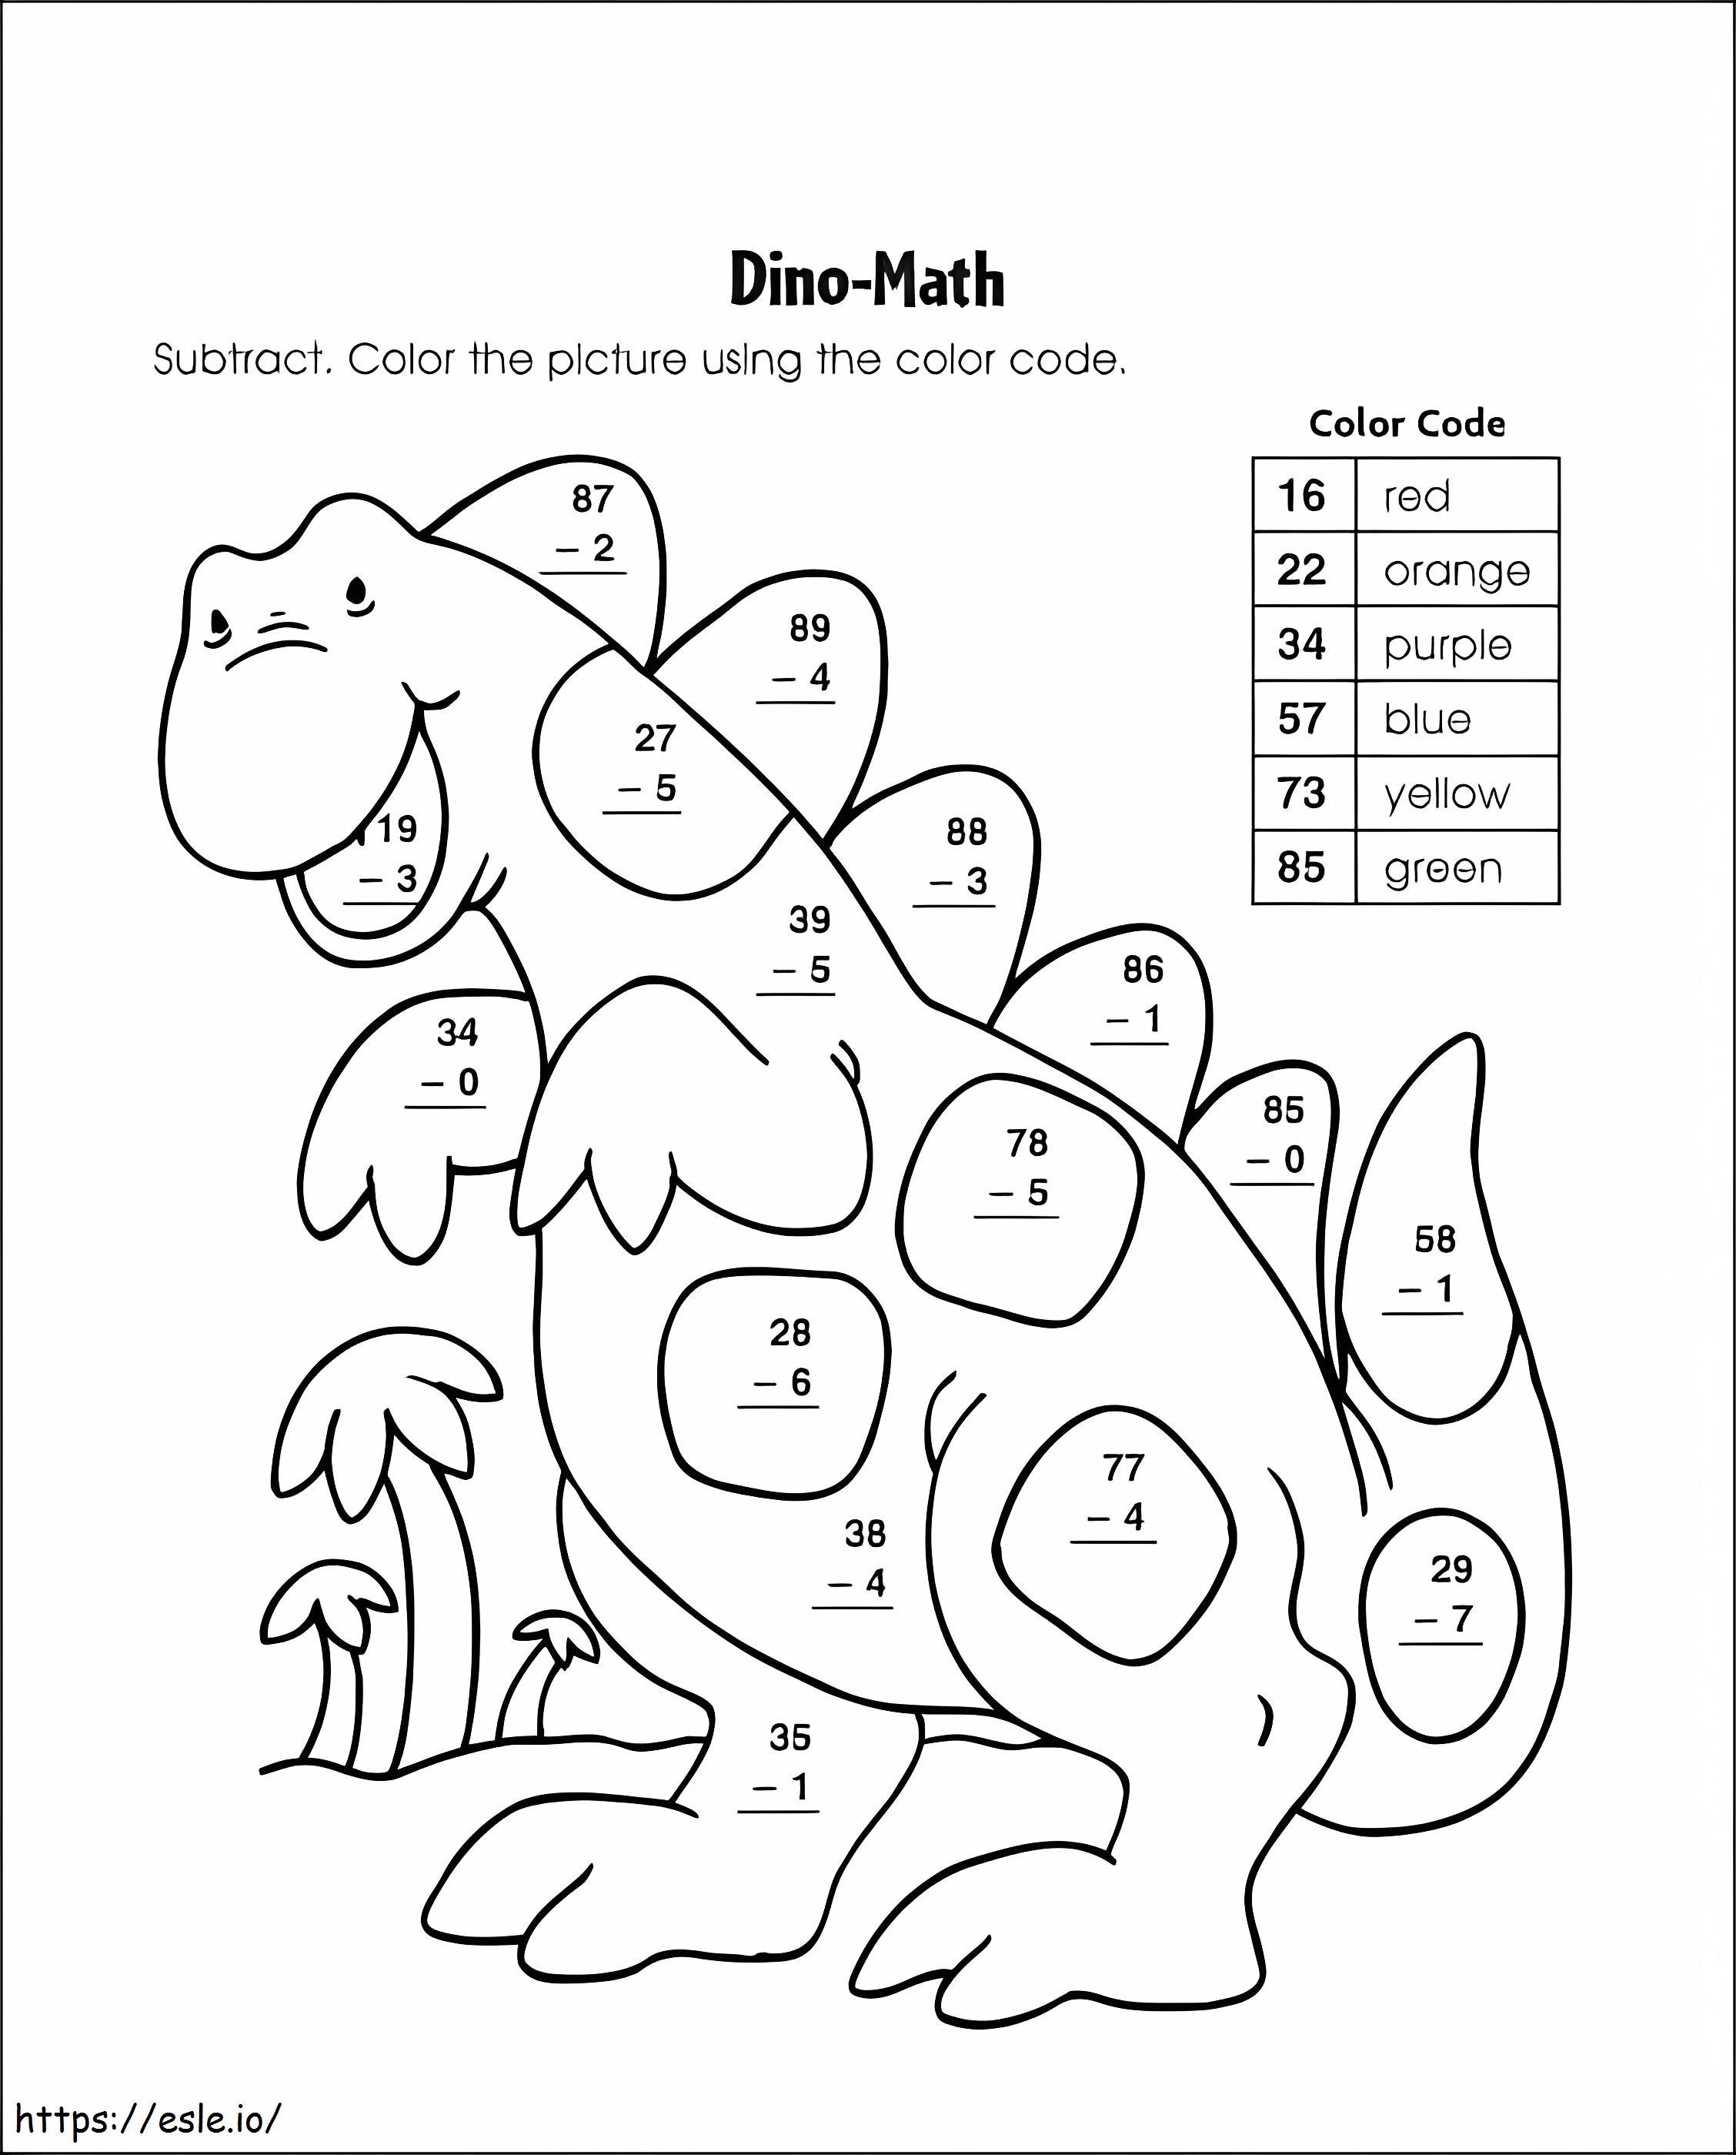 Dinosaur Subtraction Color By Number coloring page